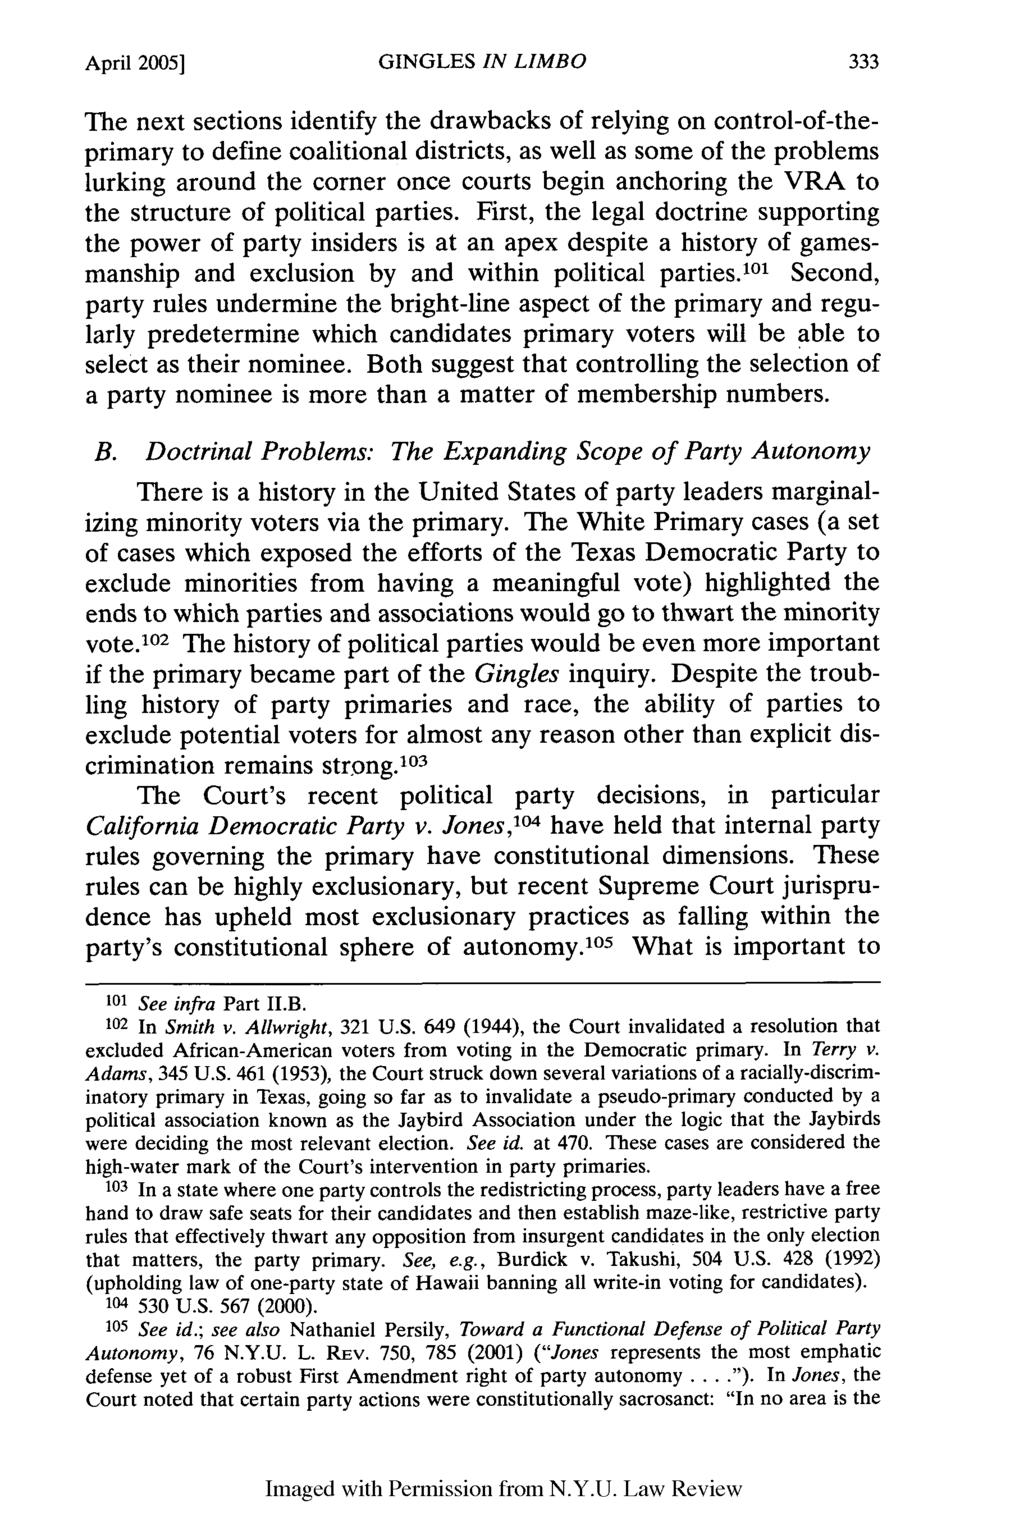 April 2005] GINGLES IN LIMBO The next sections identify the drawbacks of relying on control-of-theprimary to define coalitional districts, as well as some of the problems lurking around the corner